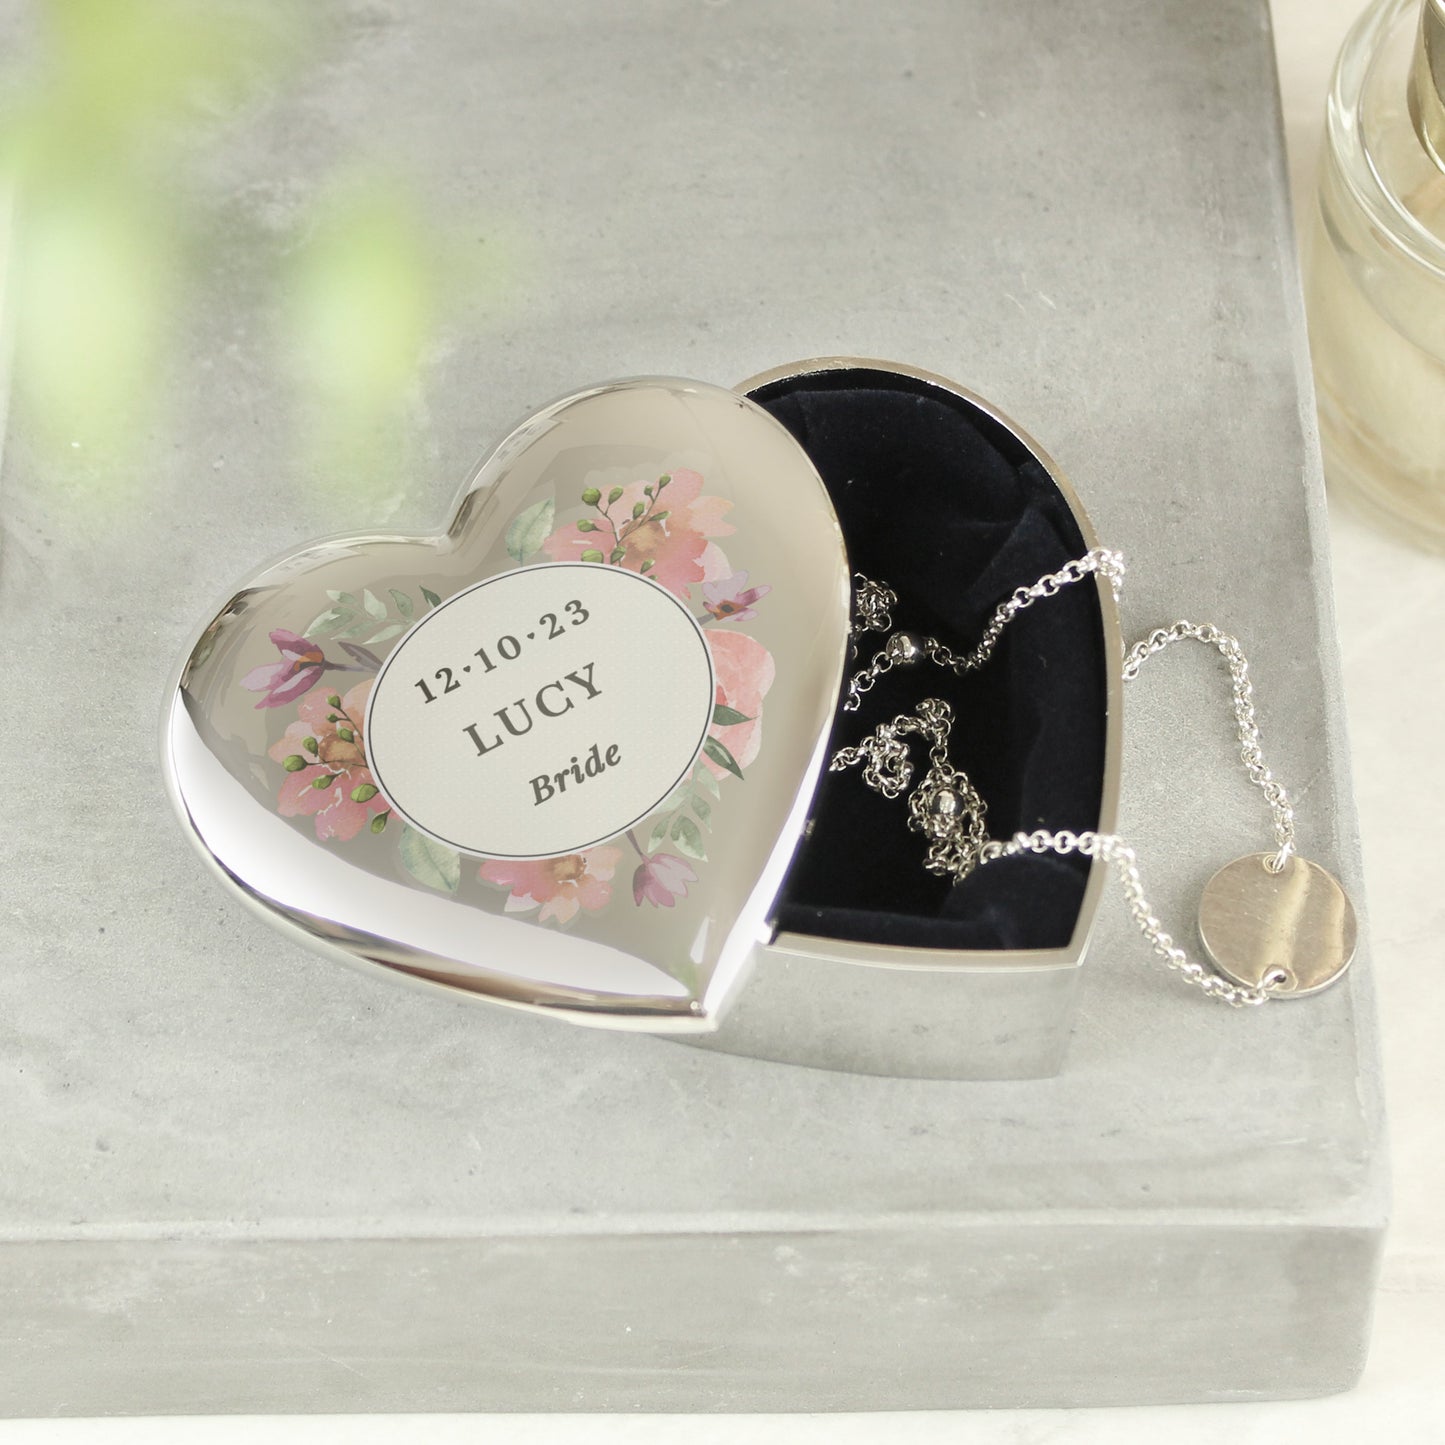 WEDDING PARTY FLORAL PERSONALISED TRINKET BOX JEWELLERY STORAGE from Eleanoras